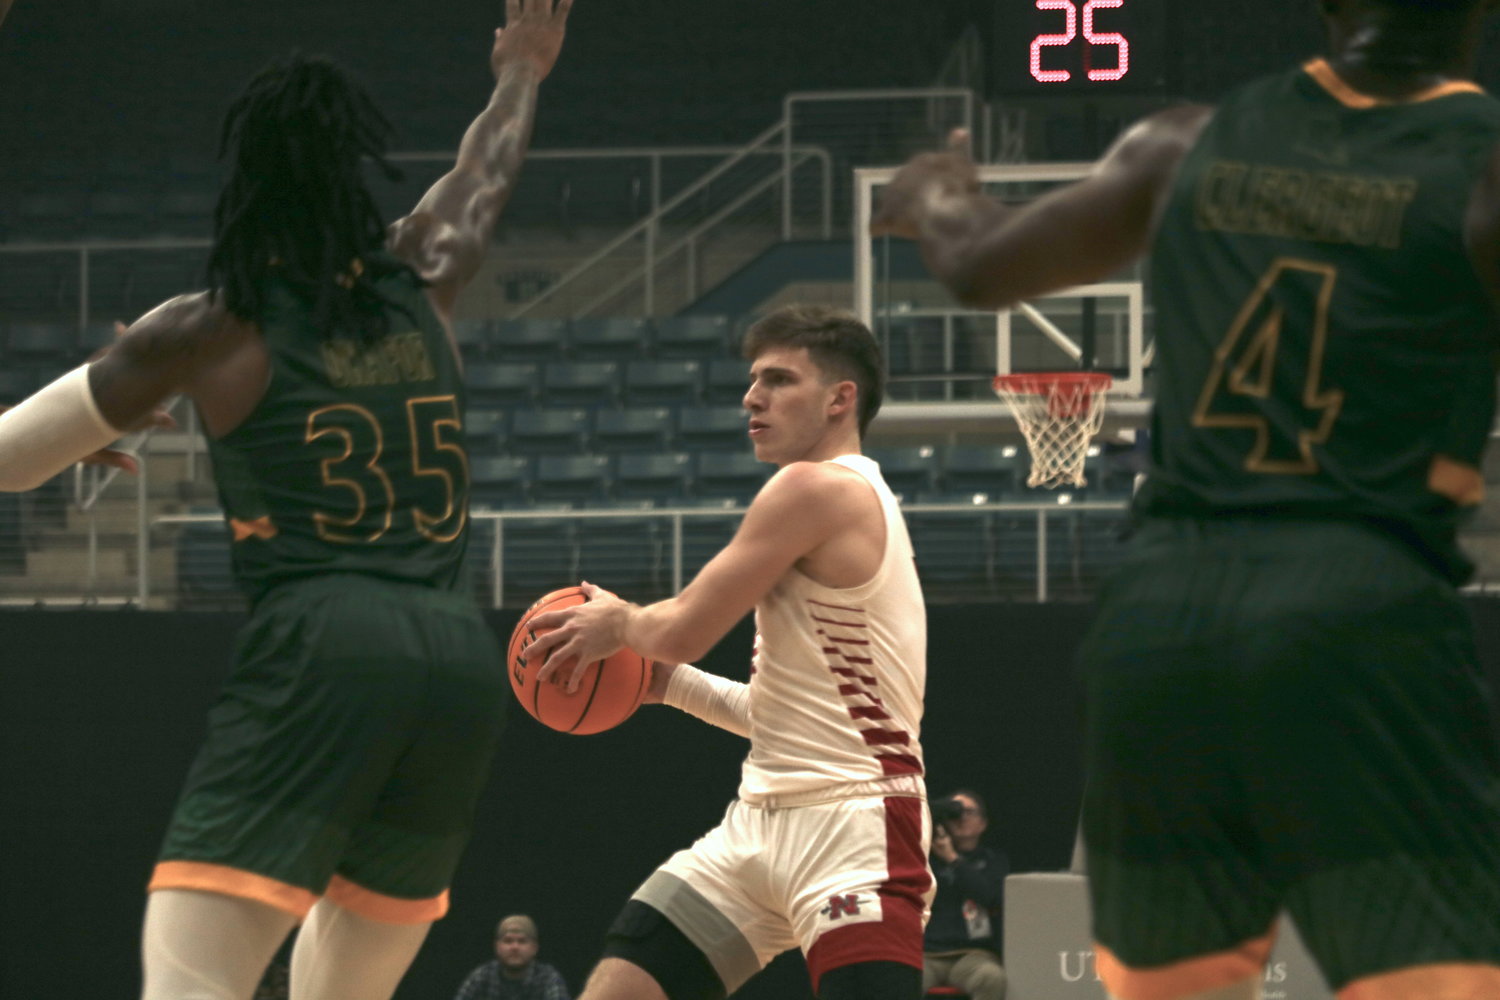 Pierce Spencer looks to pass during Saturdays Southland Tip-Off Final between Southeastern Louisiana University and Nicholls State University at the Merrell Center.